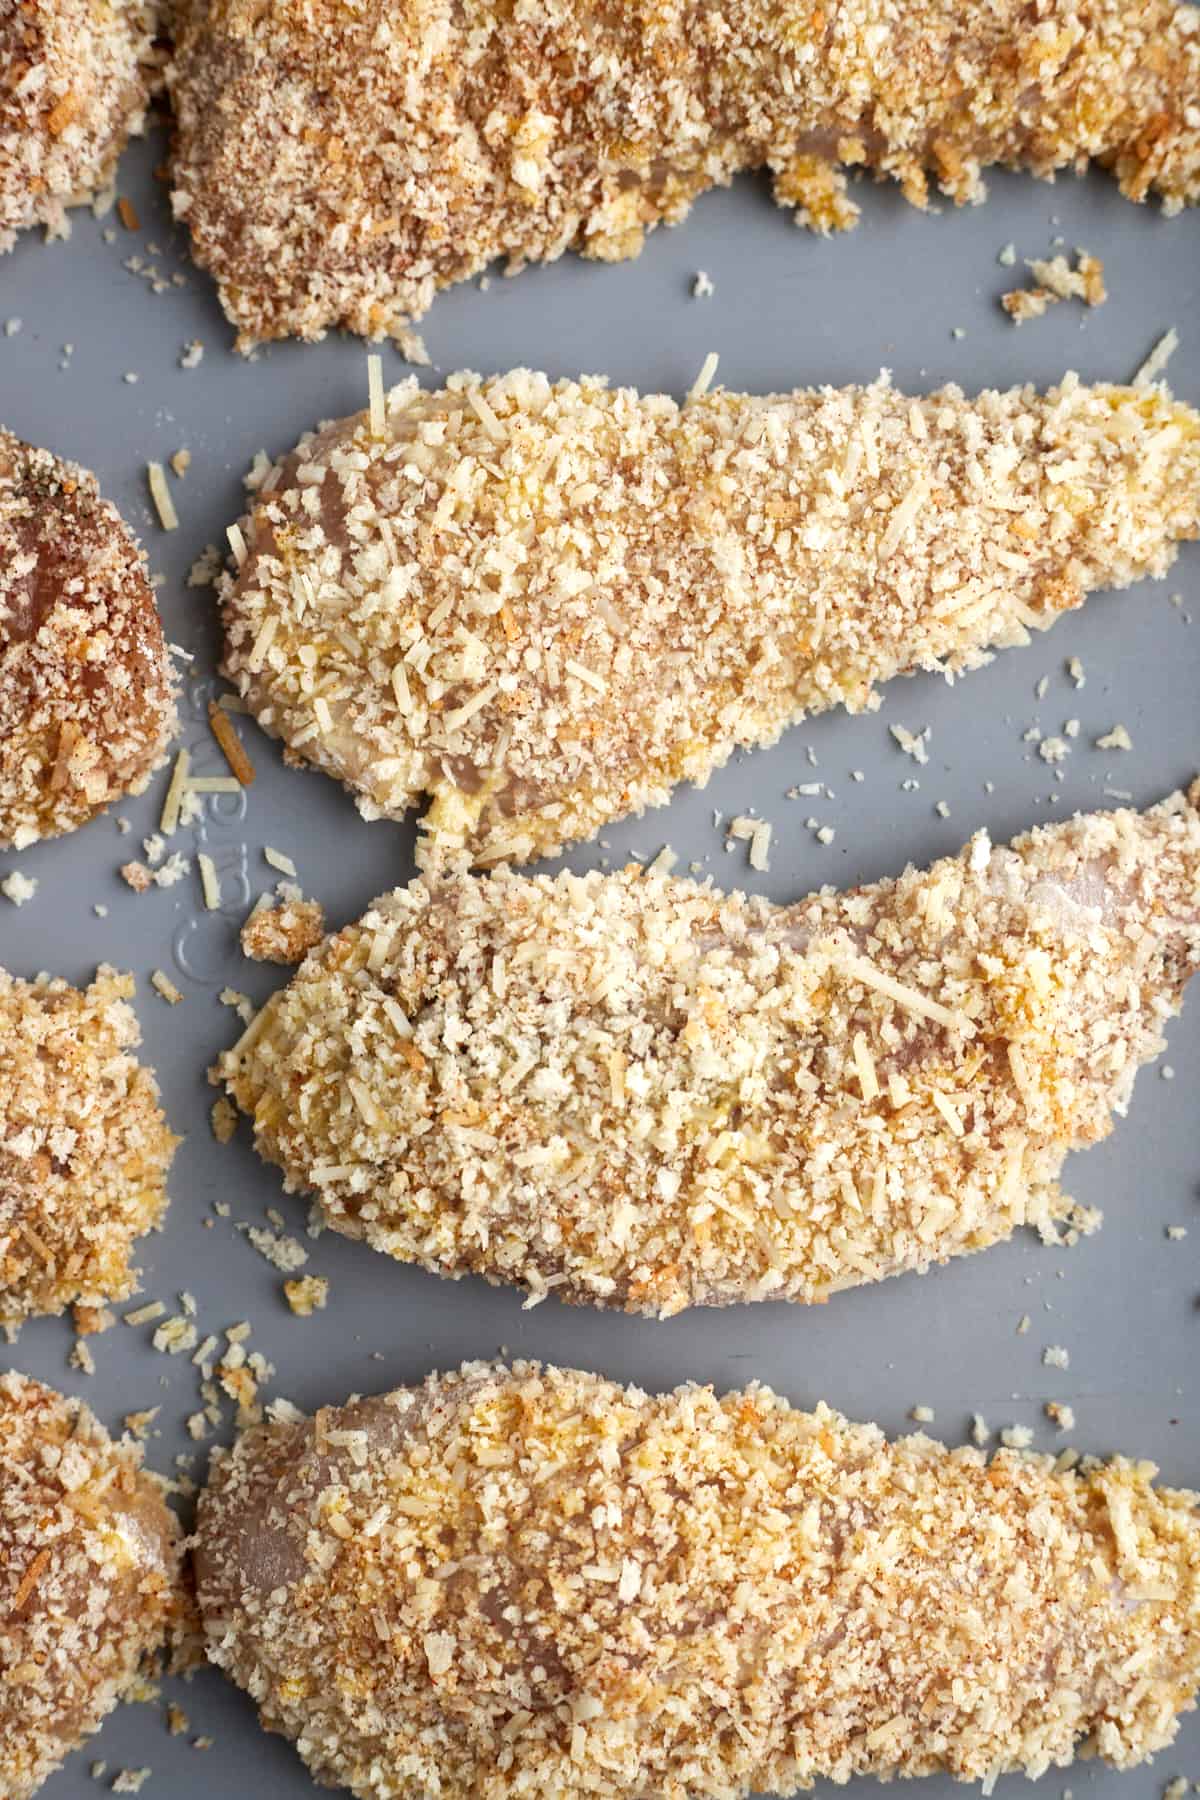 Oven-Baked Parmesan Chicken Tenders